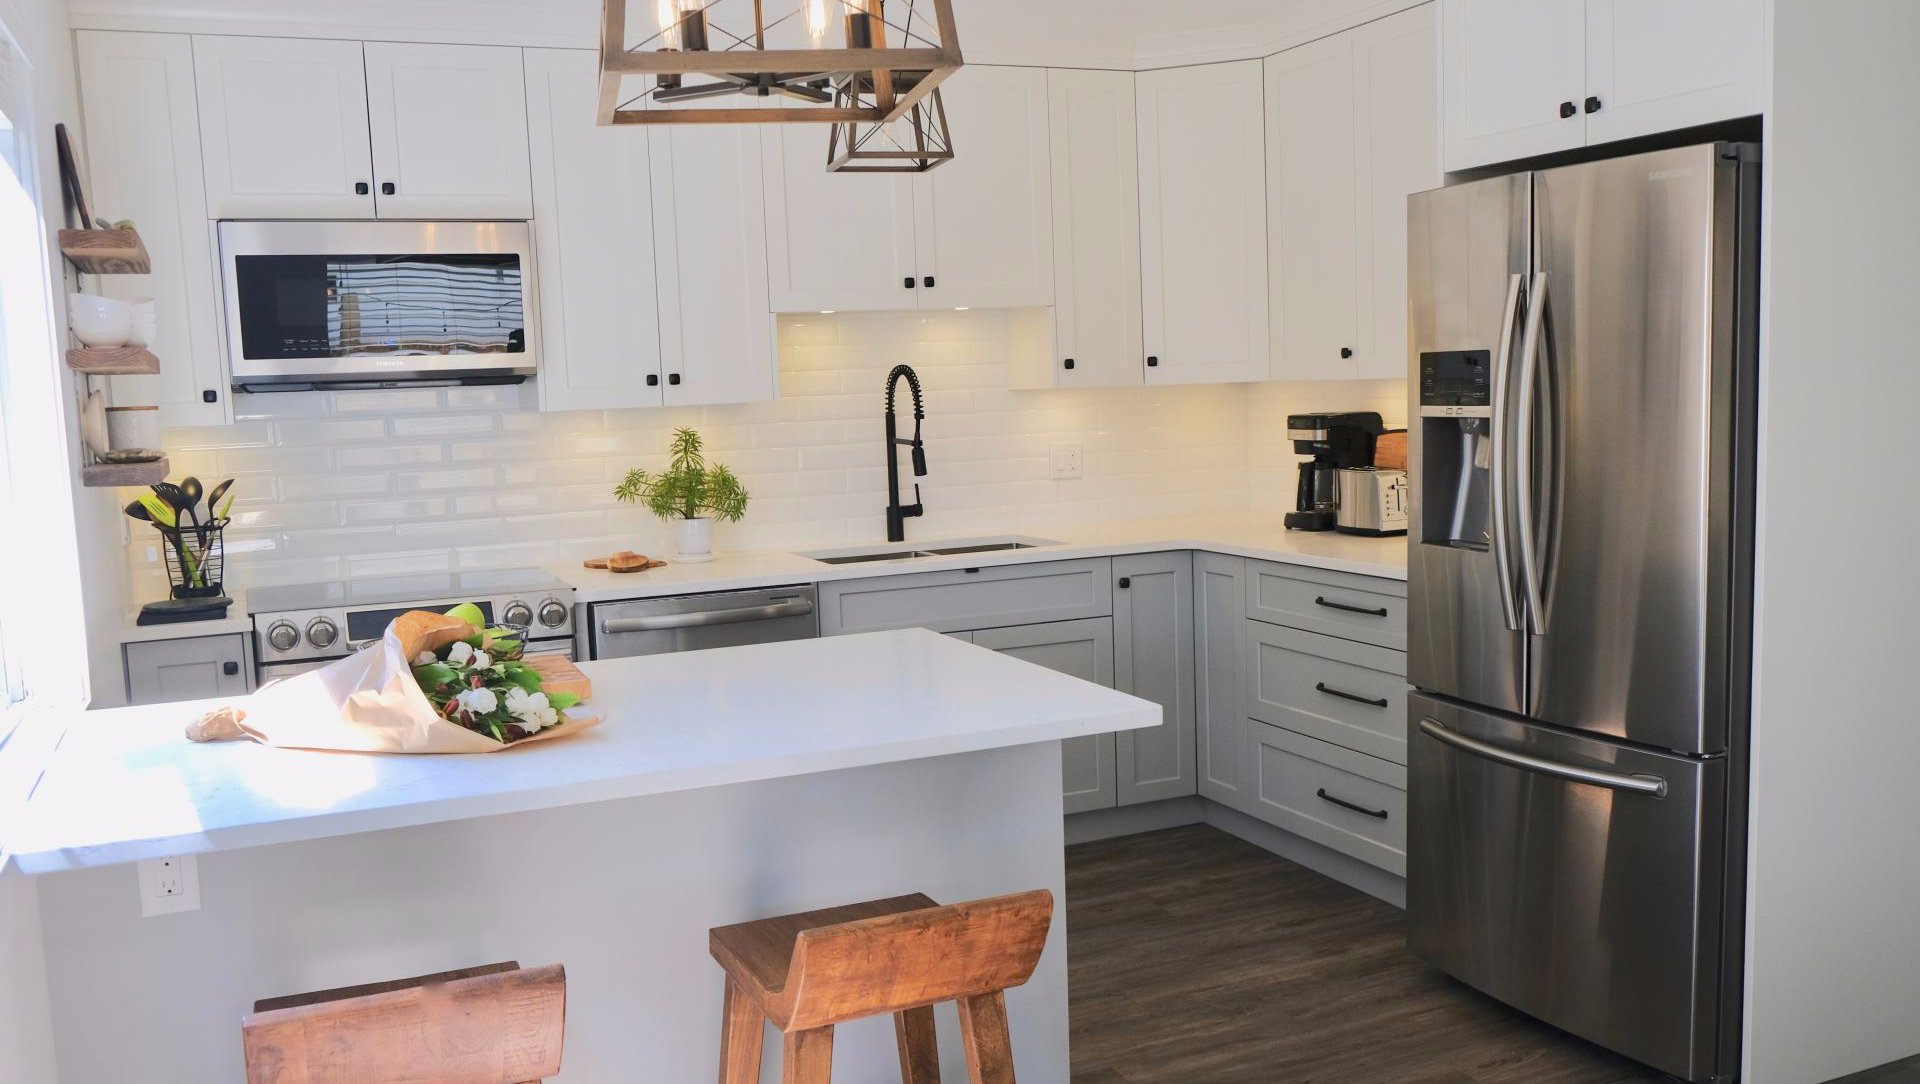 Kitchen Remodel Tips For A Manufactured Home